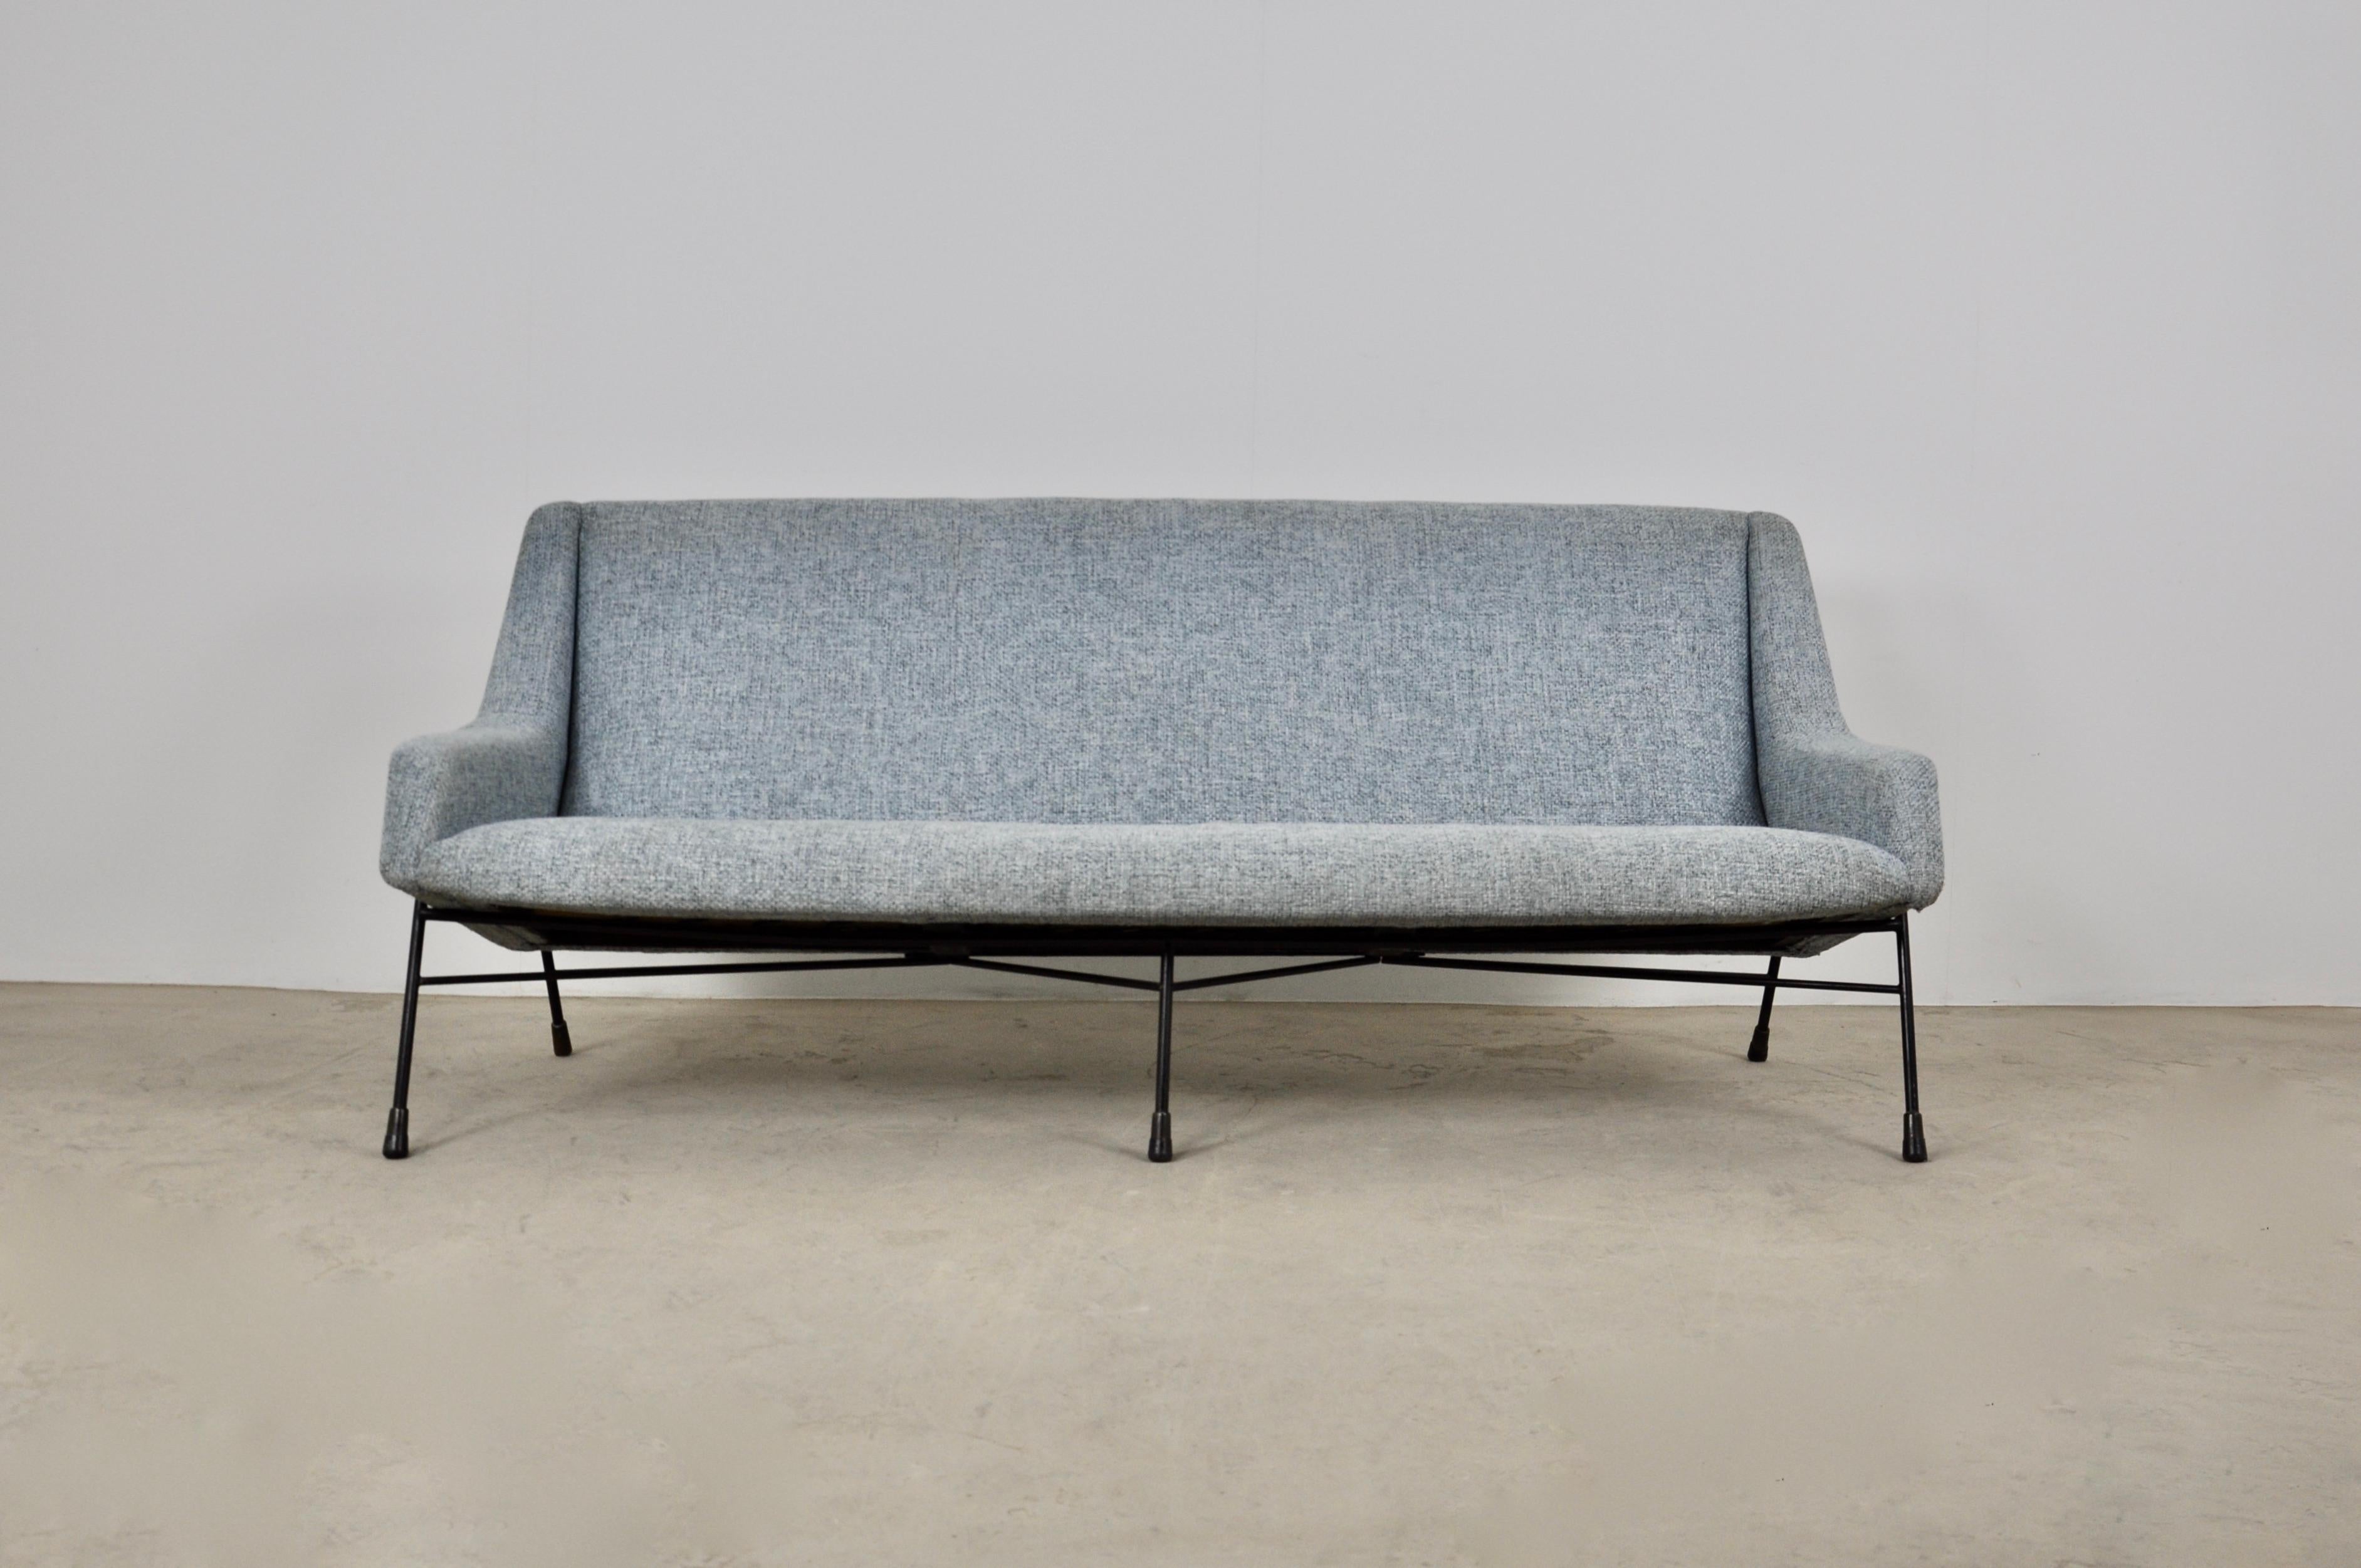 Sofa 3 places in fabric and metal structure in black color. Measures: Seat height 40cm. Wear due to time and the age of the sofa.